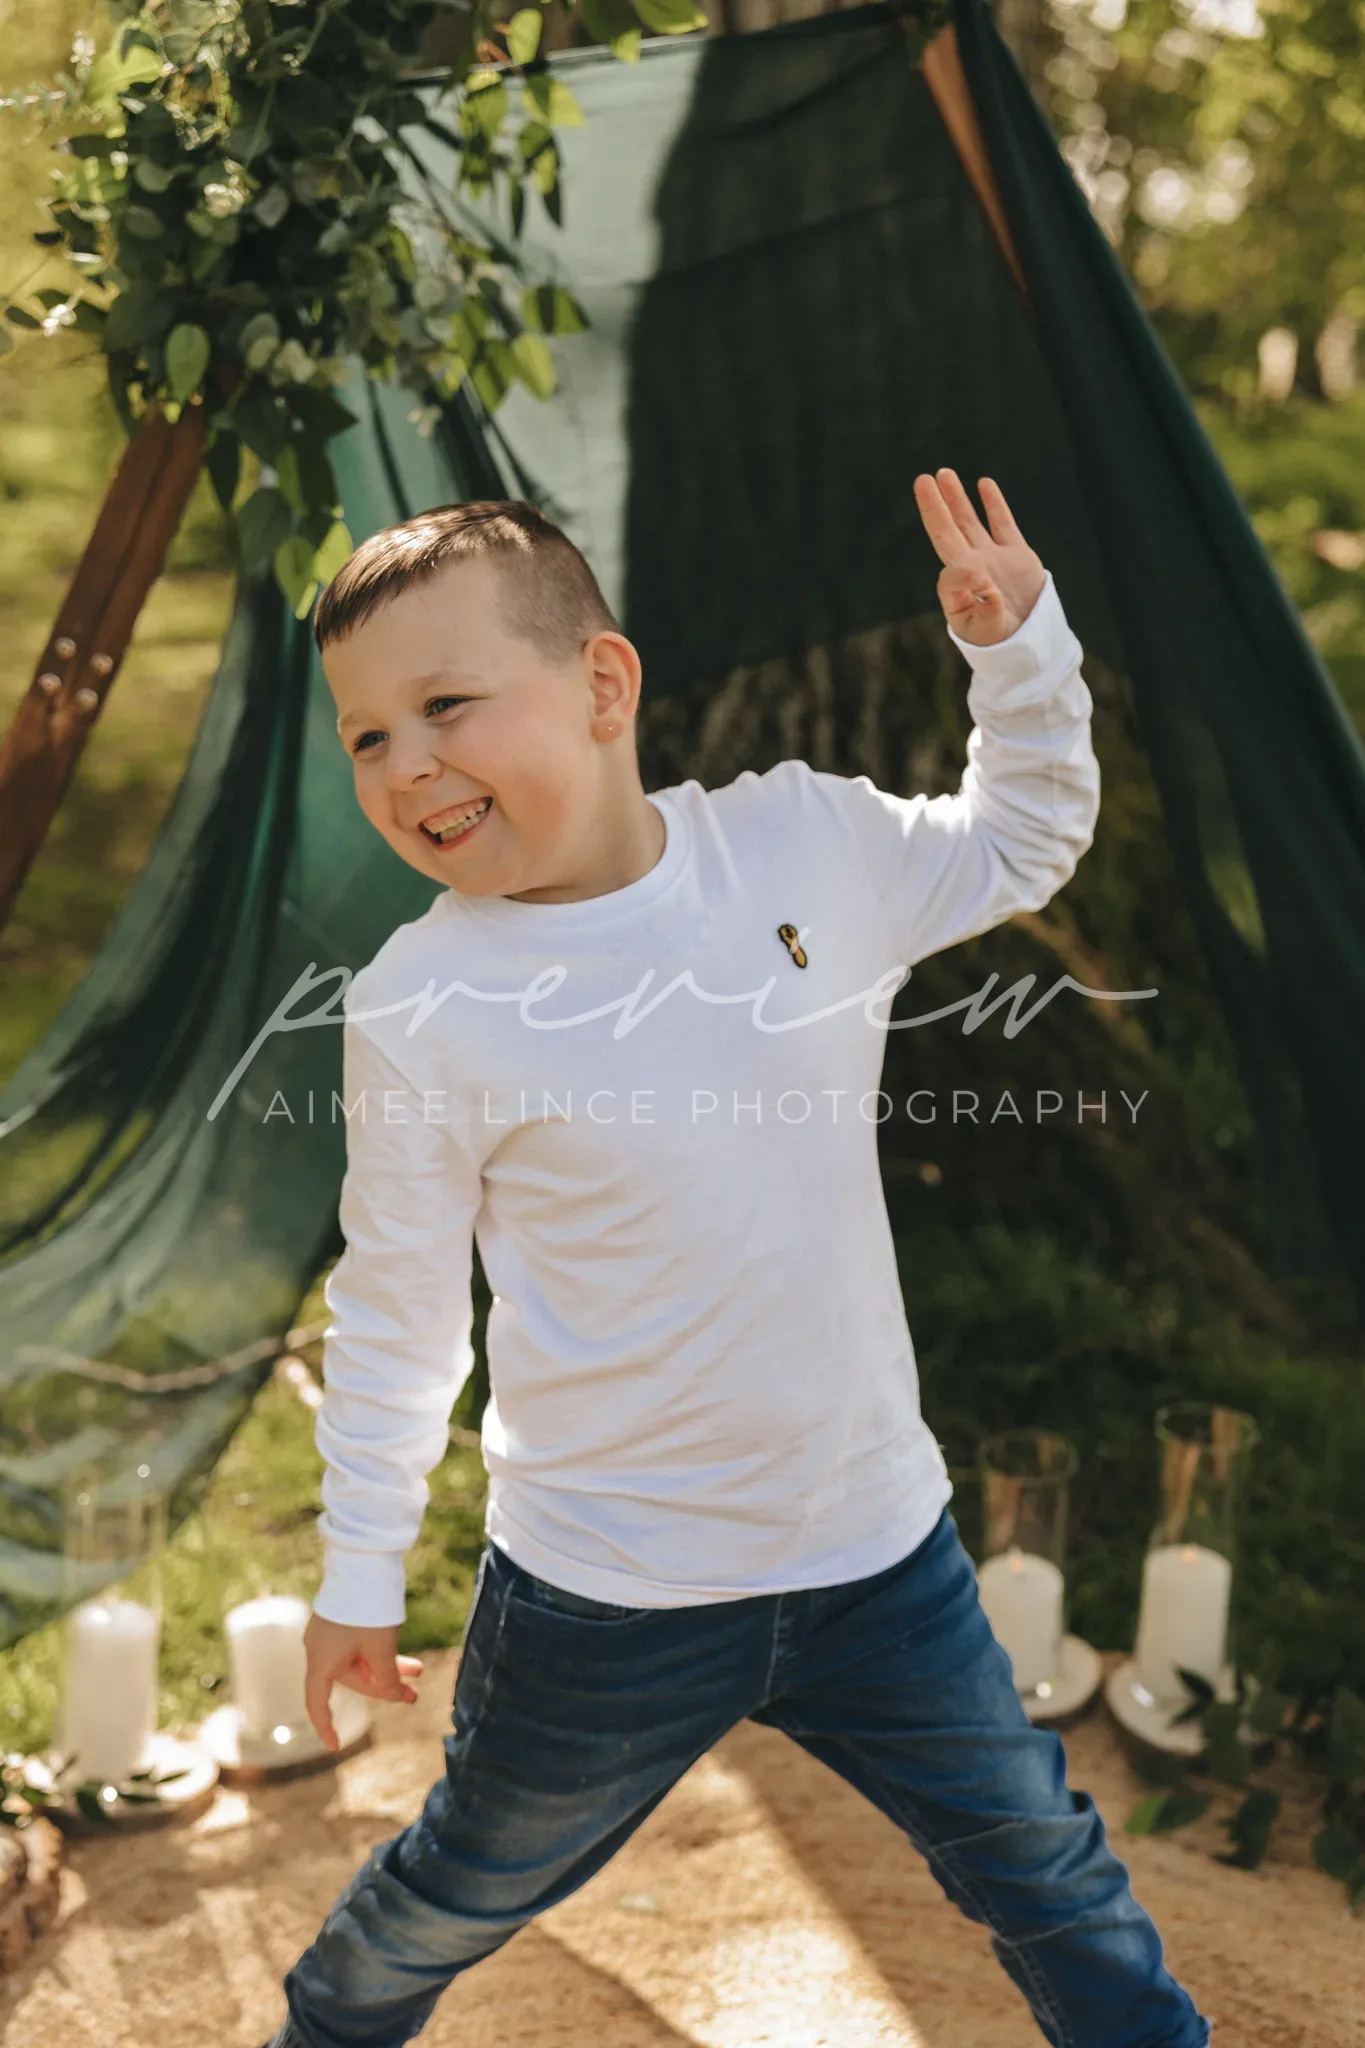 A smiling young boy with short hair throws a peace sign, standing in a garden. he wears a white sweater and blue jeans. behind him, a green fabric teepee adorned with vines adds whimsy to the sunny backdrop.